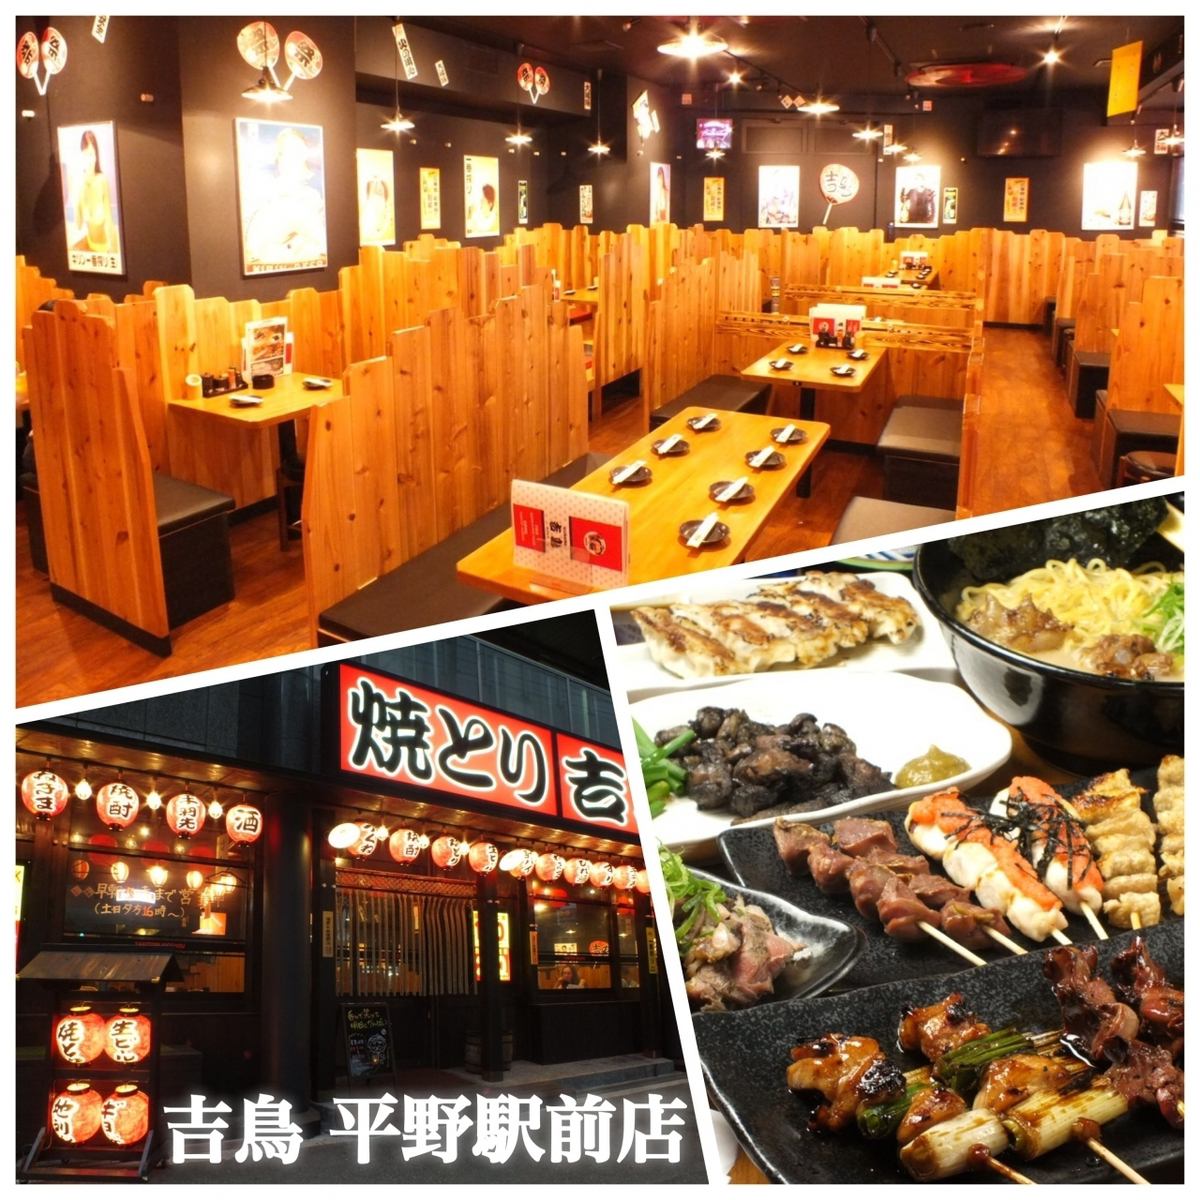 NEW OPEN ★ Large-scale izakaya that can accommodate 90 people ★ With delicious yakitori